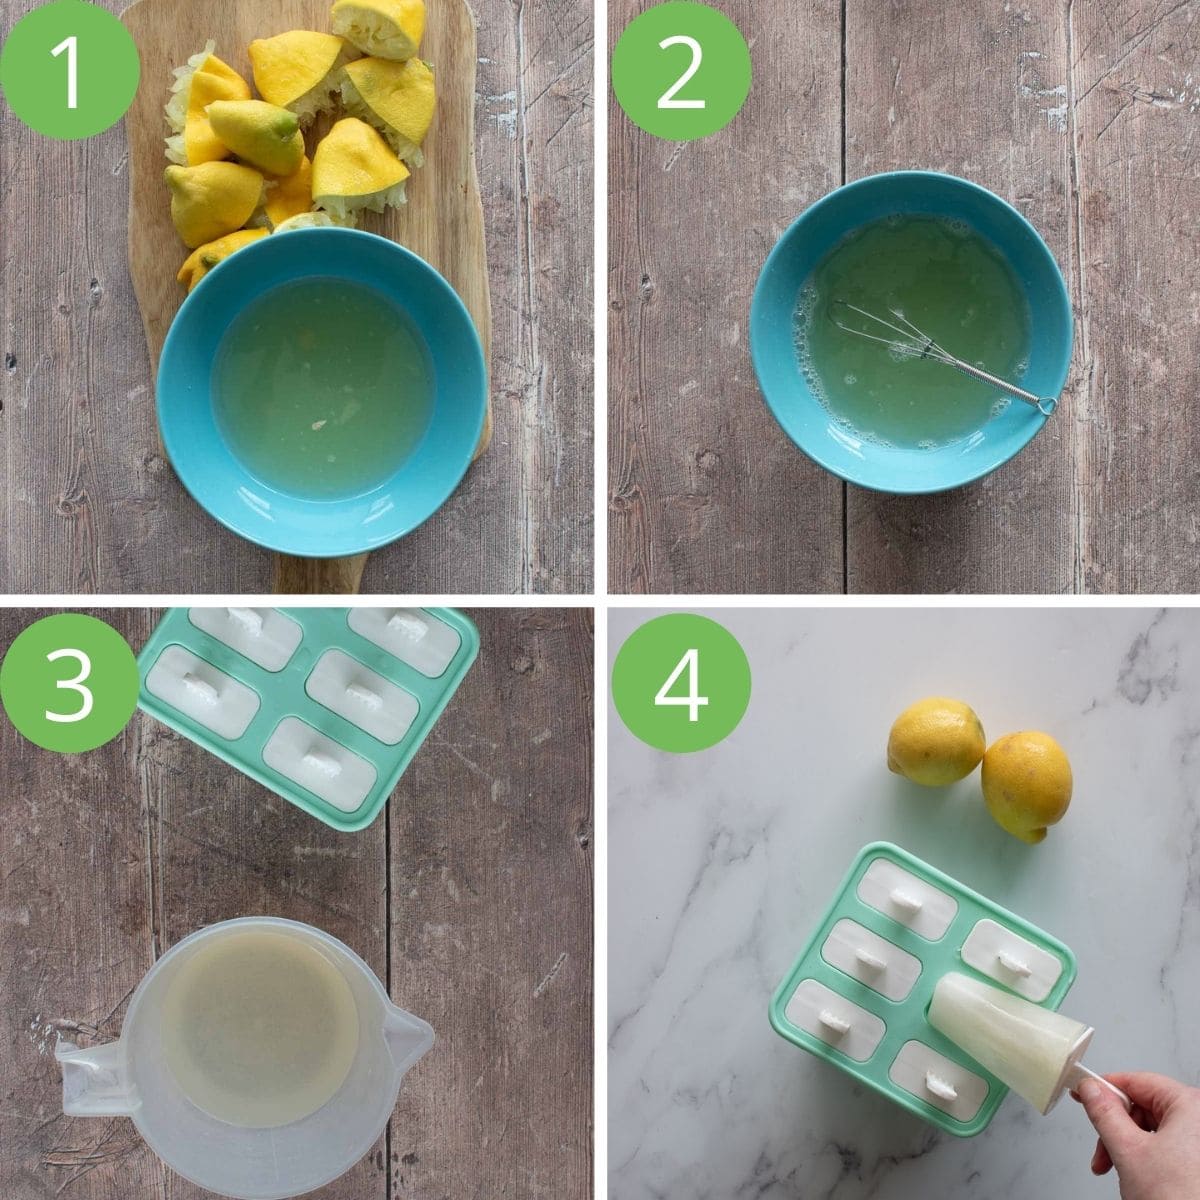 Step by step images showing how to make lemonade popsicles.